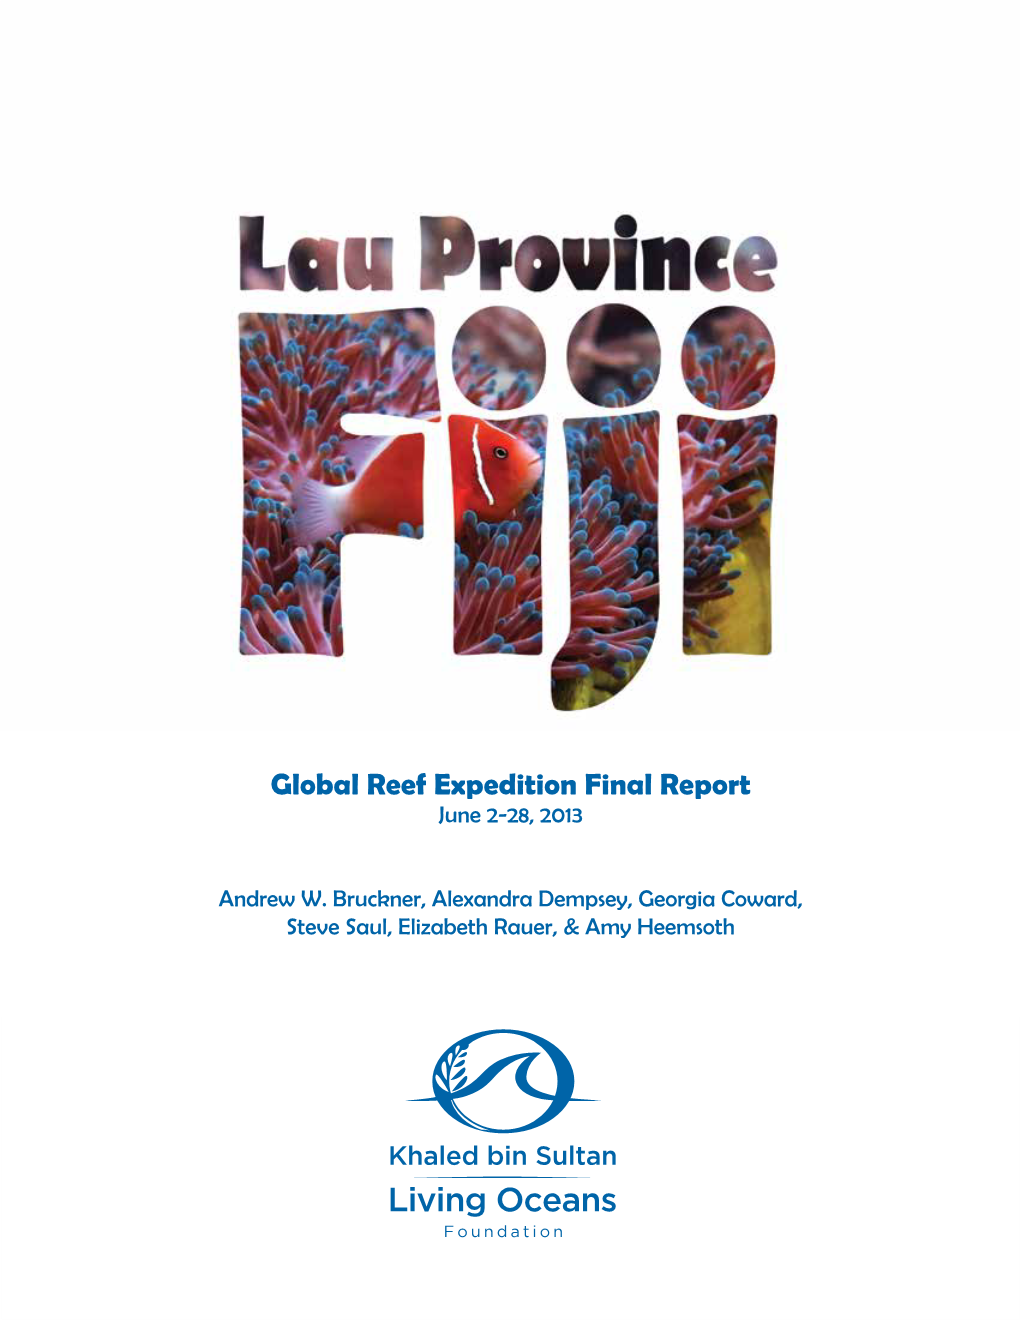 Global Reef Expedition Final Report June 2-28, 2013